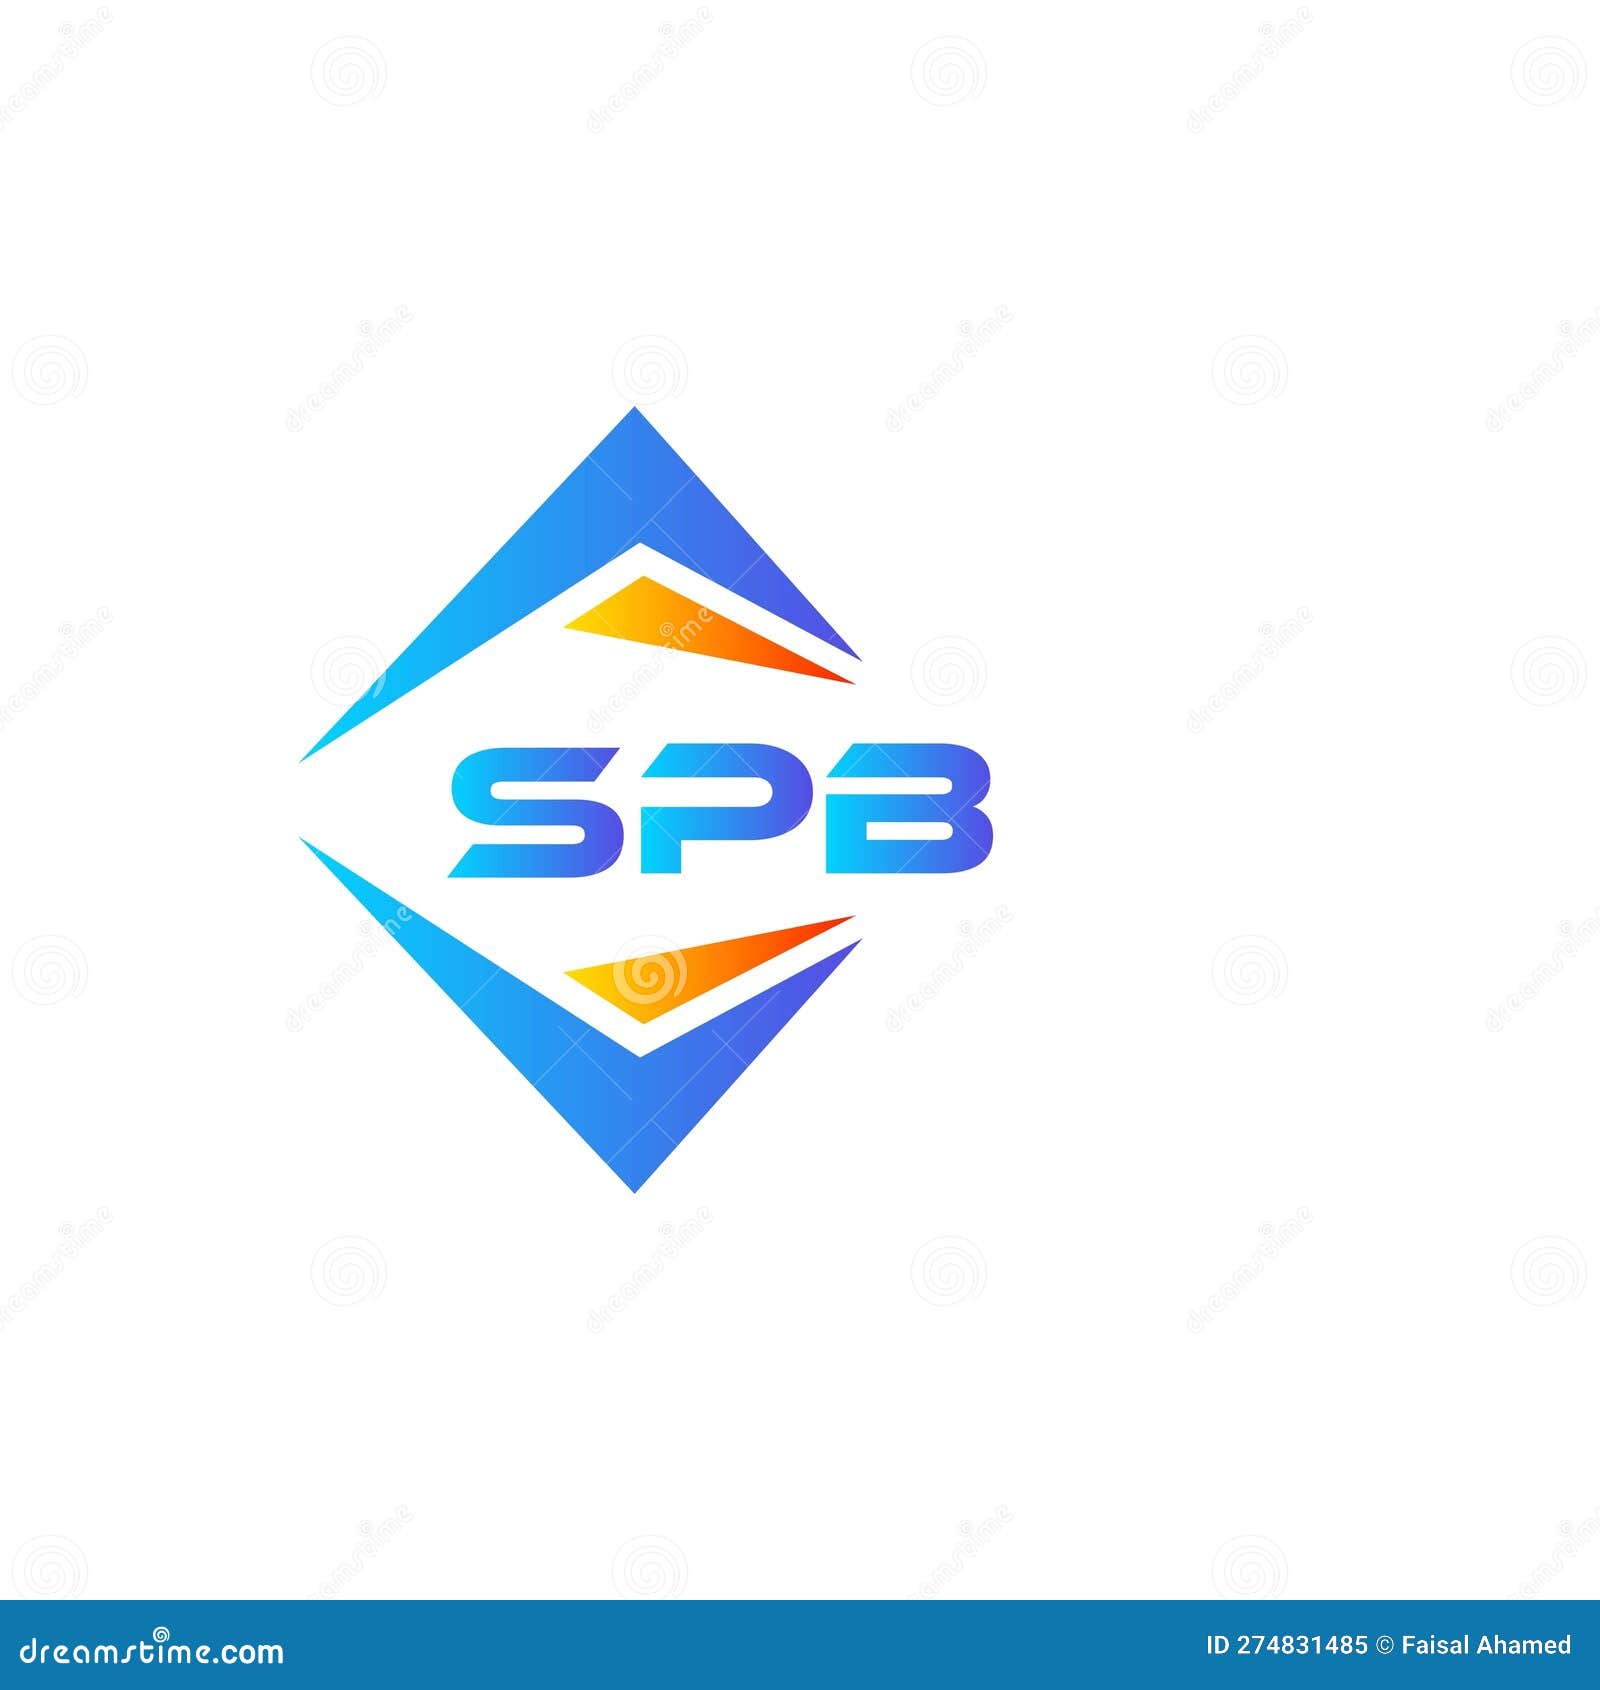 spb abstract technology logo  on white background. spb creative initials letter logo concept